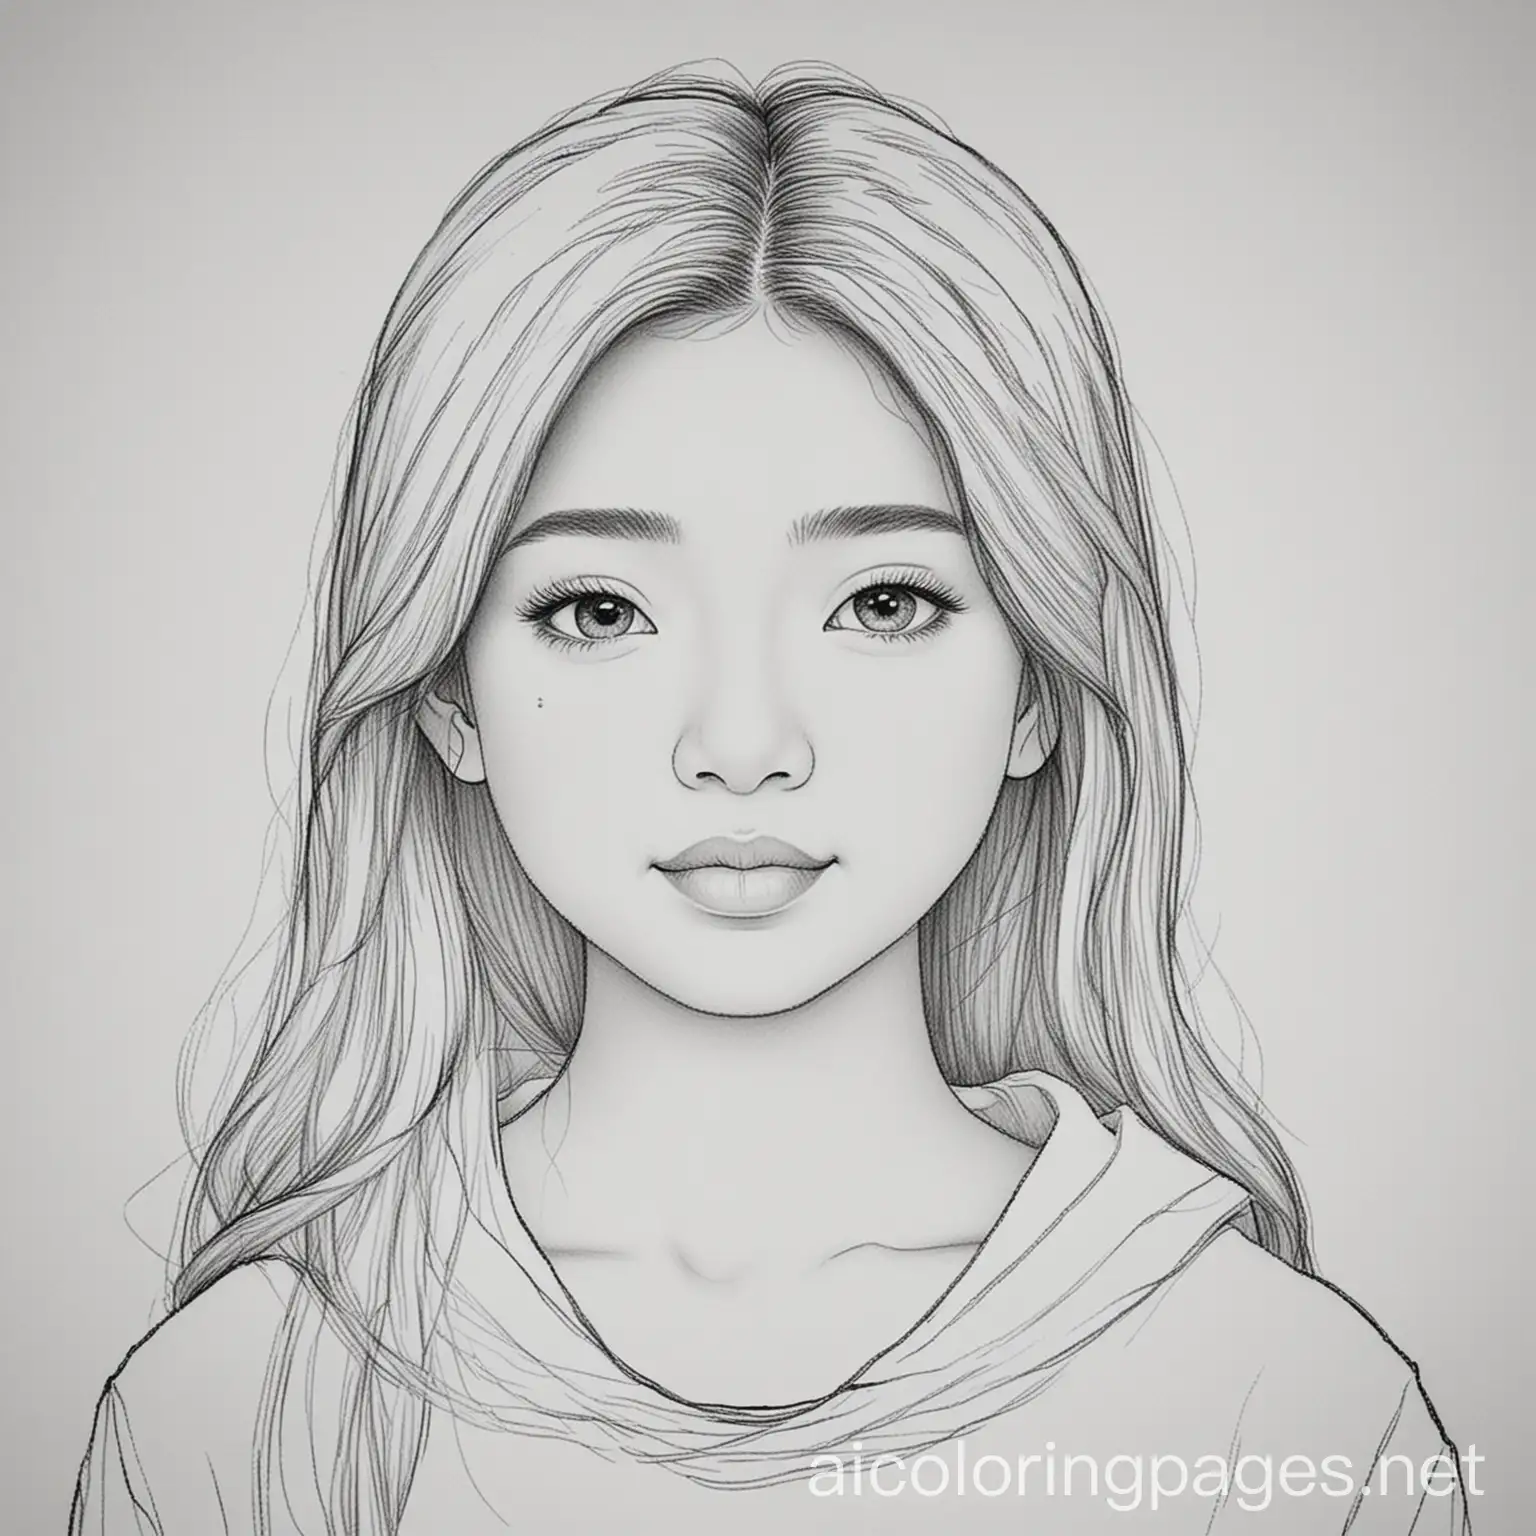 asian realistic teen

, Coloring Page, black and white, line art, white background, Simplicity, Ample White Space. The background of the coloring page is plain white to make it easy for young children to color within the lines. The outlines of all the subjects are easy to distinguish, making it simple for kids to color without too much difficulty